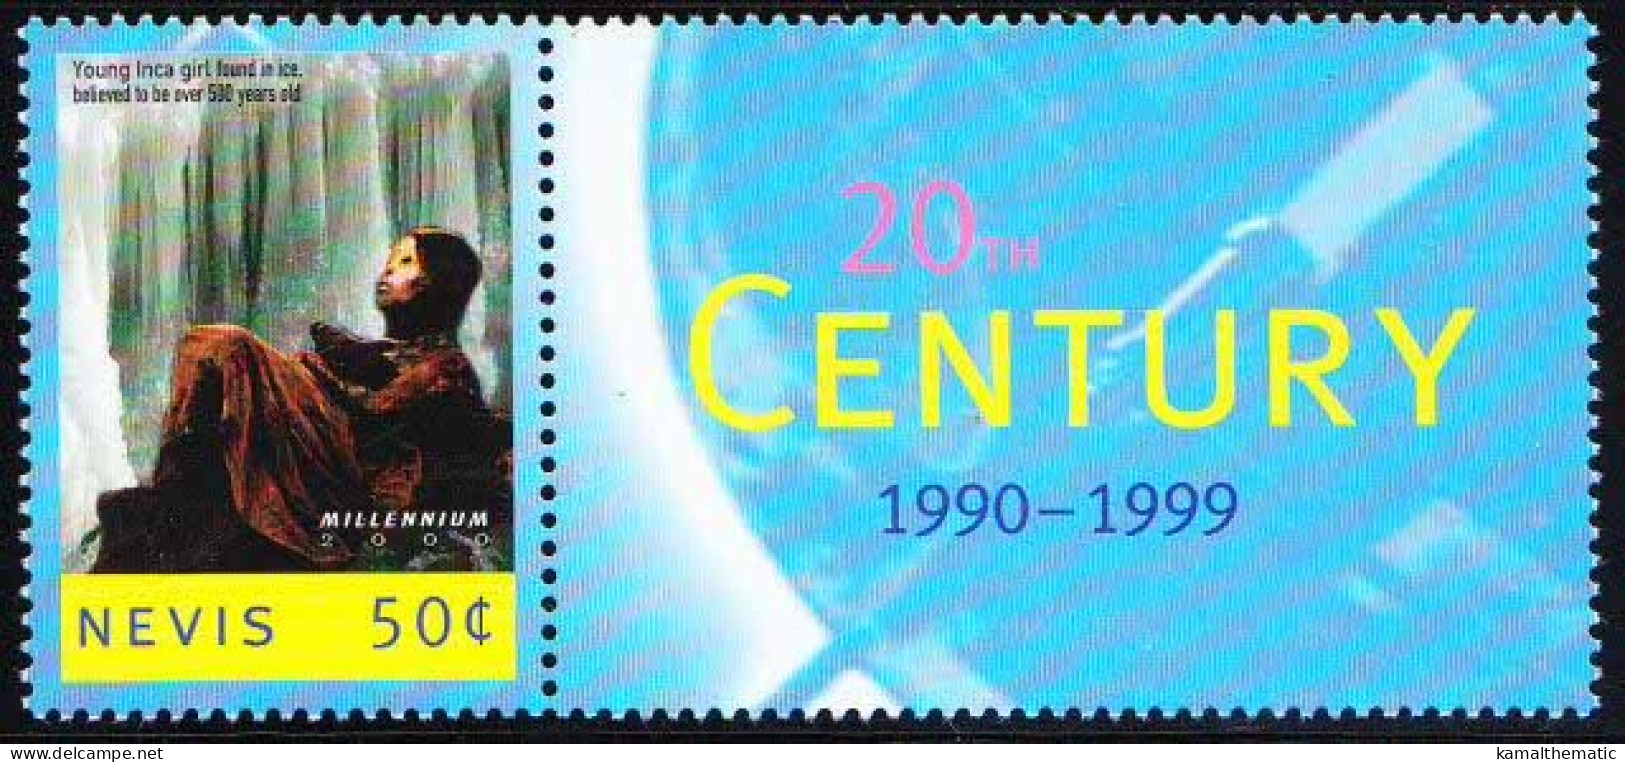 Nevis 2000 MNH, 500 Yr. Old Inca Girl Found In ICE Mount Ampato, Peru Anthropologist - Archaeology